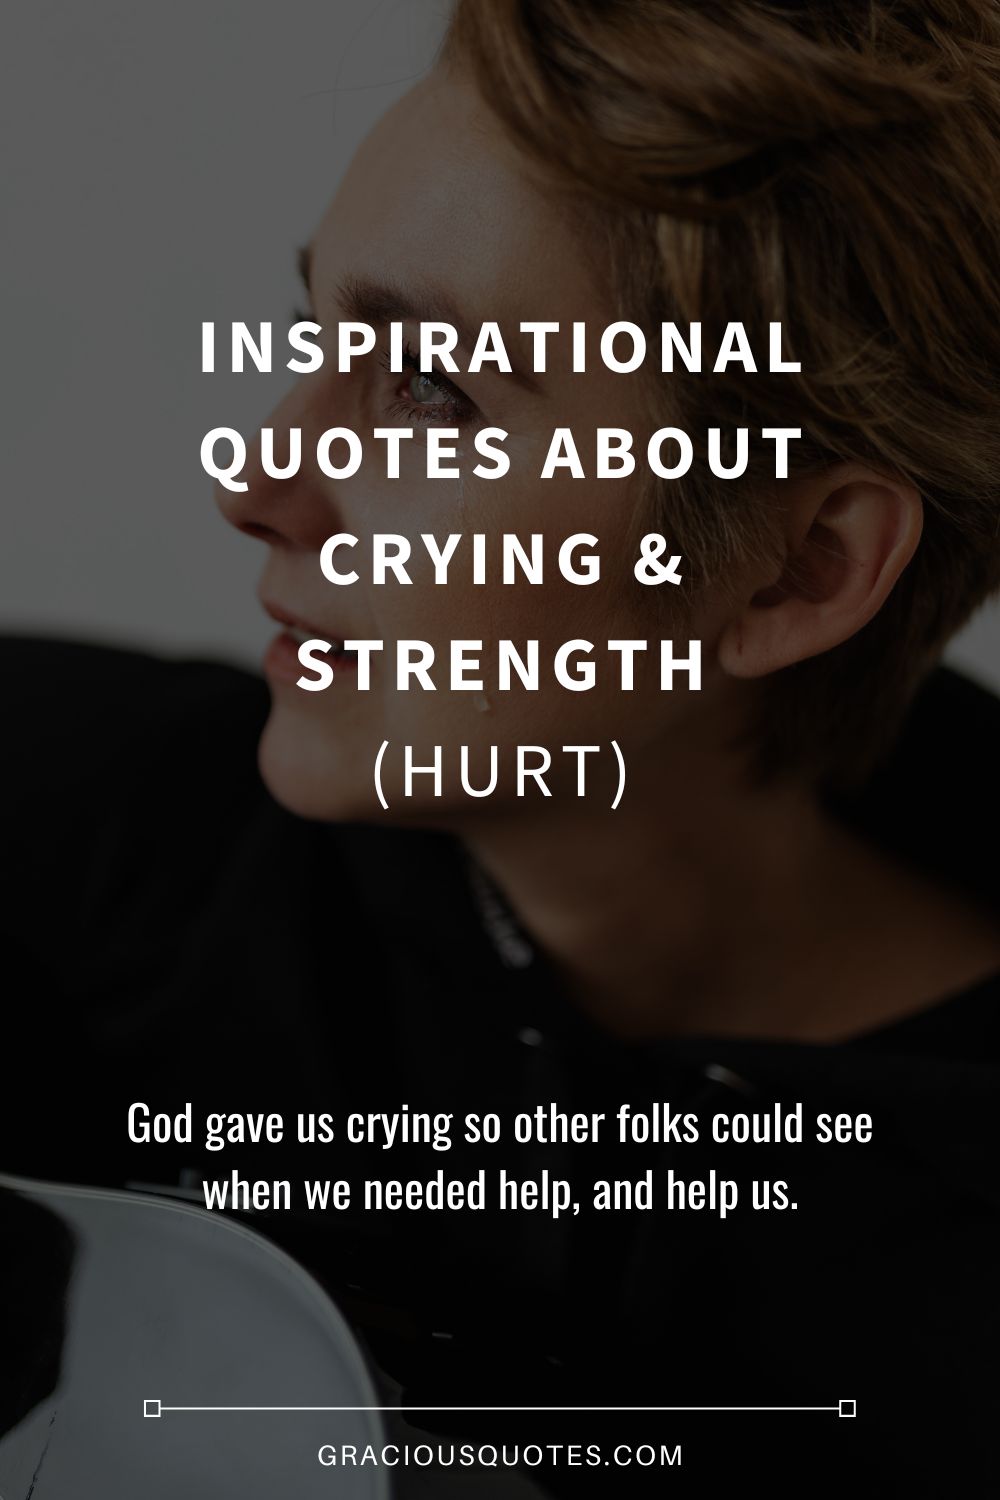 Inspirational Quotes About Crying & Strength (HURT) - Gracious Quotes